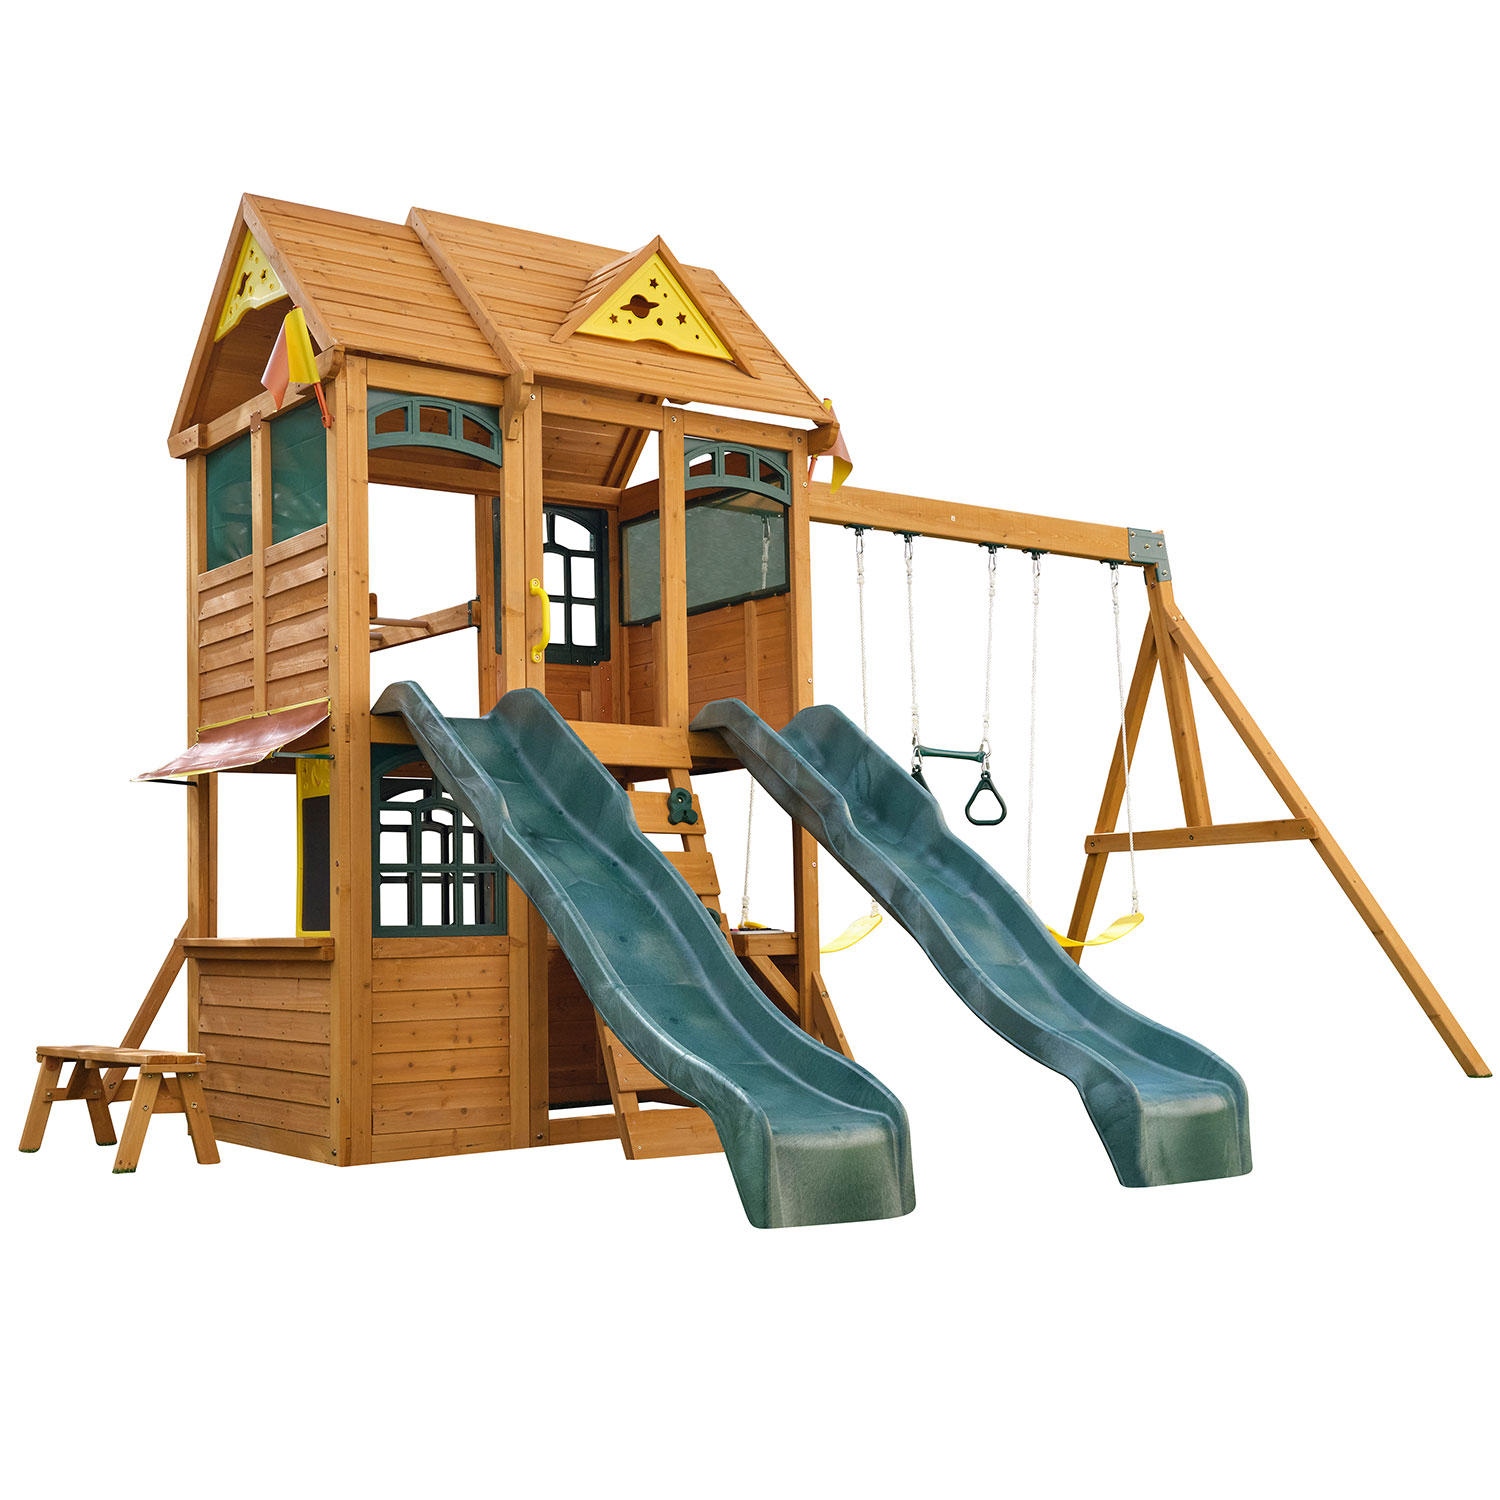 KidKraft Overland Heights Wooden Swing Set with 2 Slides, Monkey Bar and 3 Swings